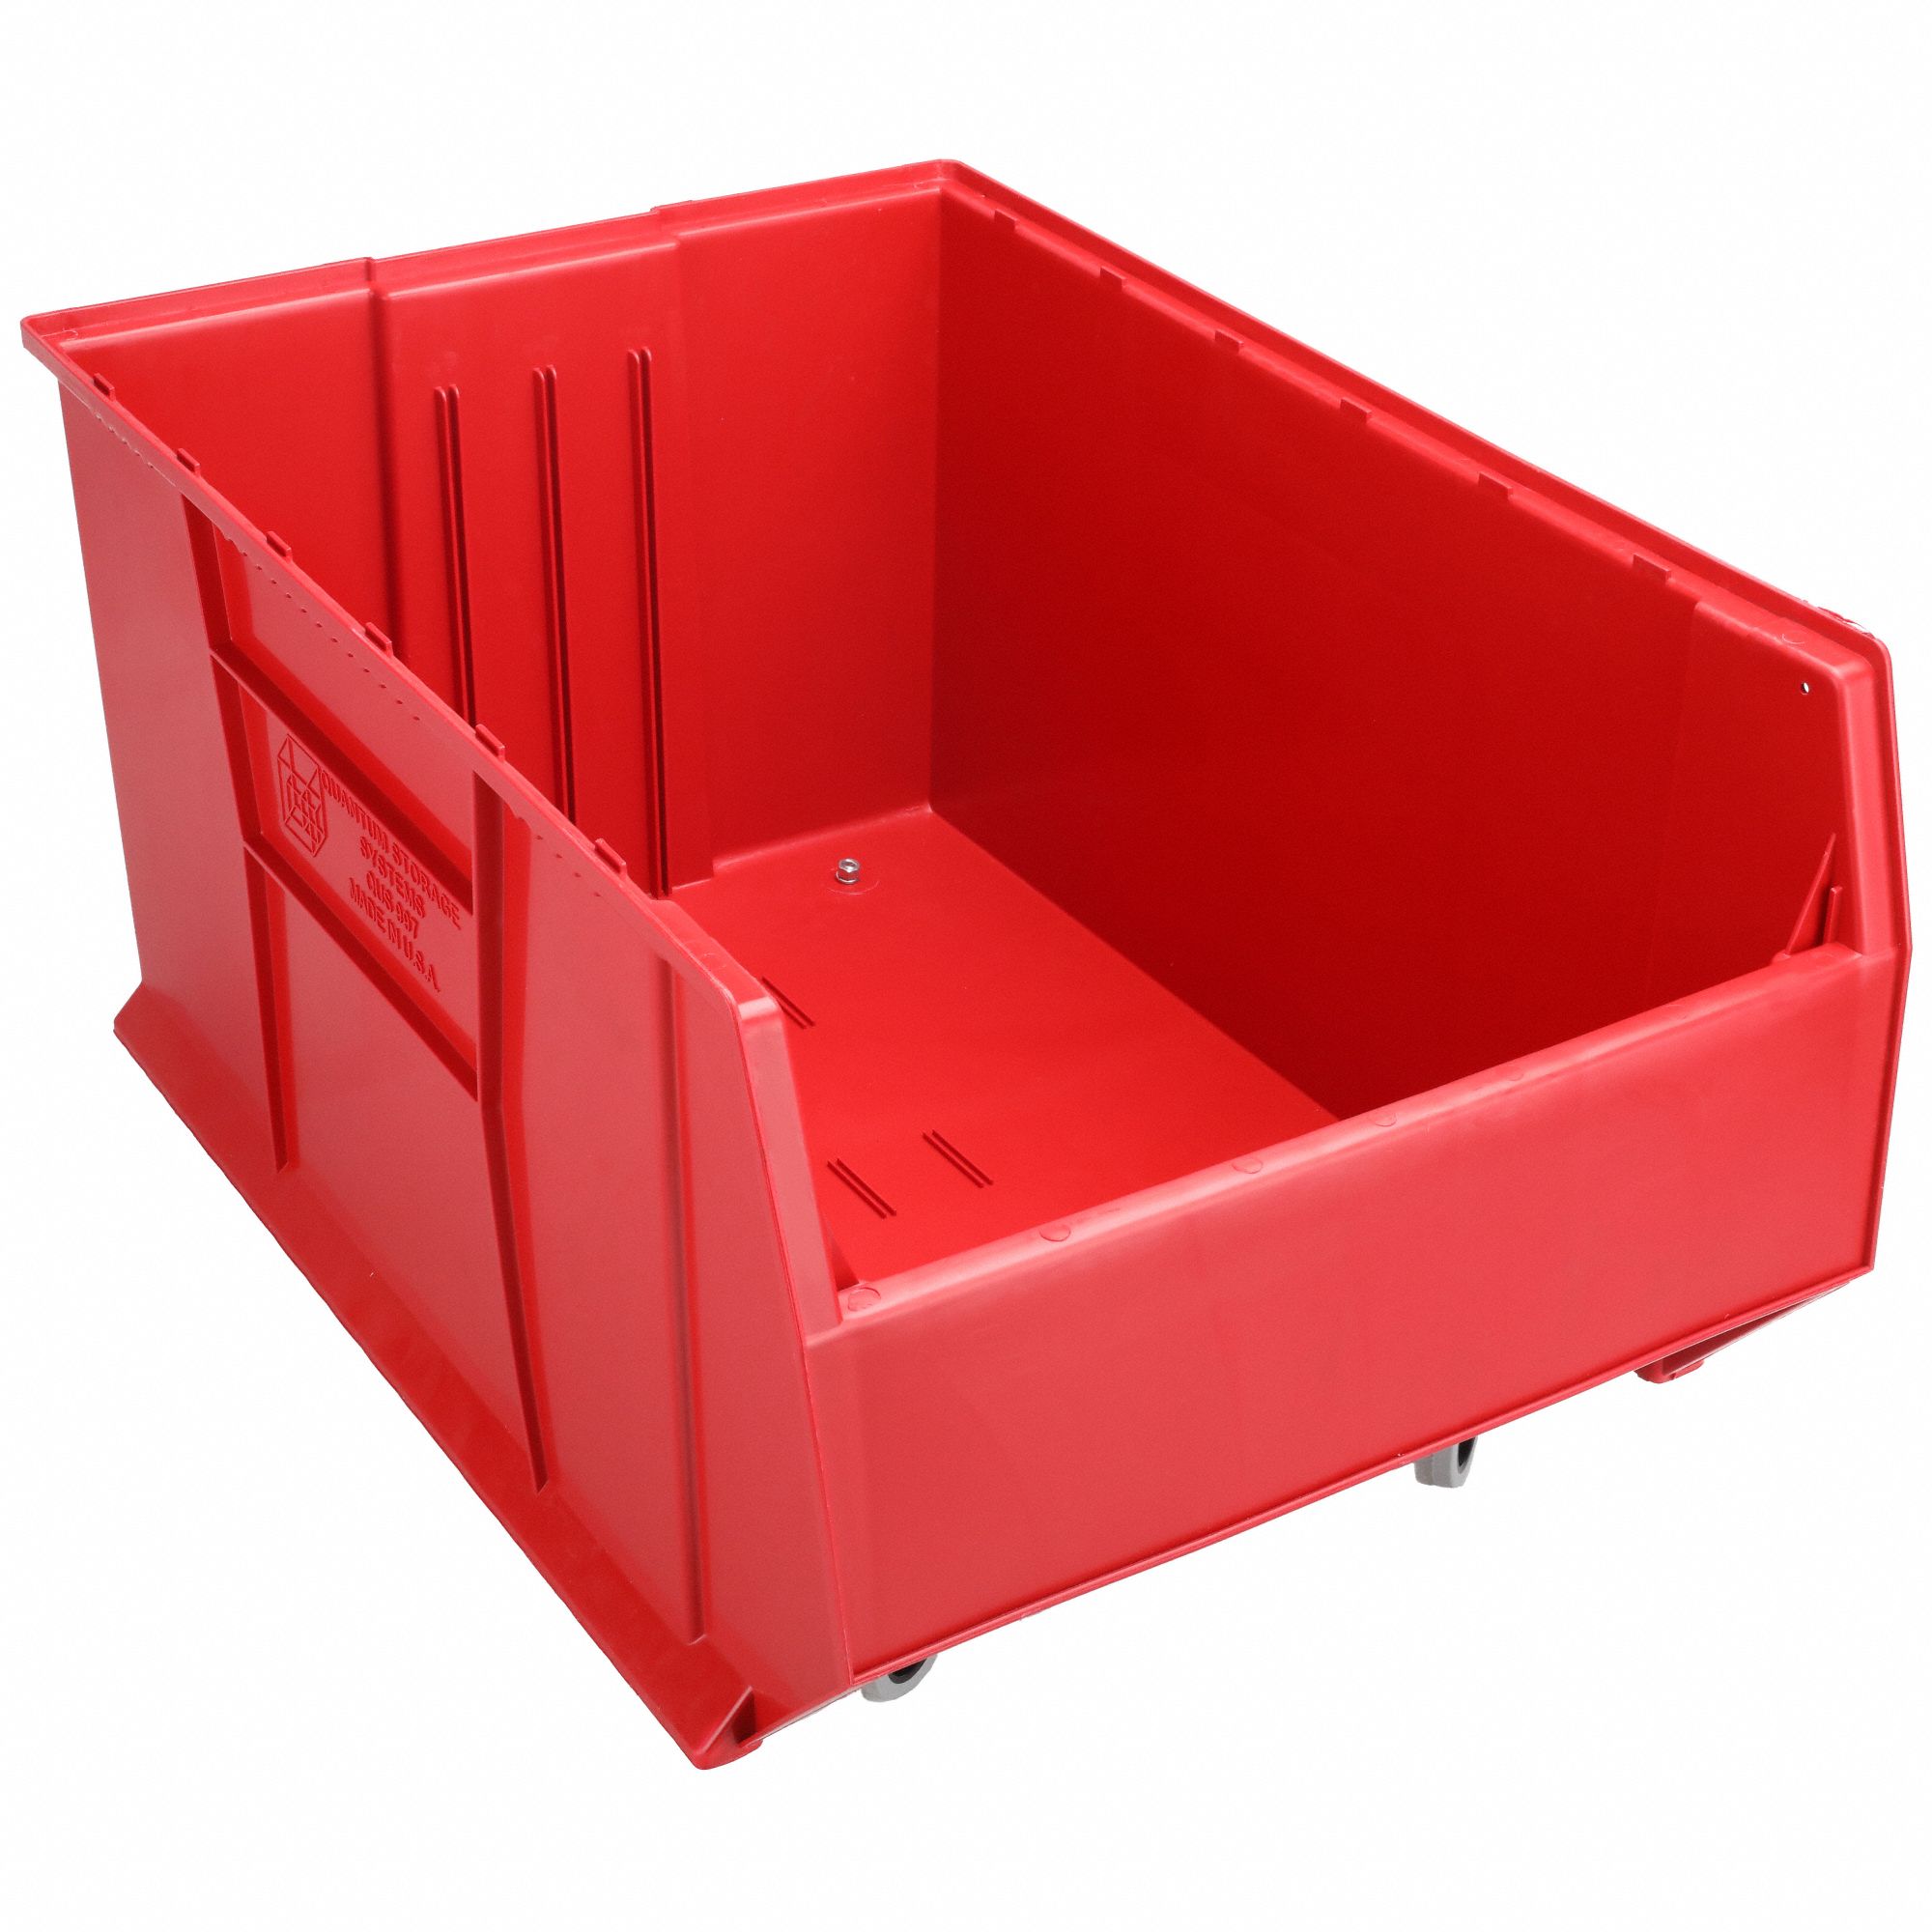 QUANTUM STORAGE SYSTEMS Mobile Bin: 35 7/8 in Overall Lg, 23 7/8 in x 17  1/2 in, Red, Stackable